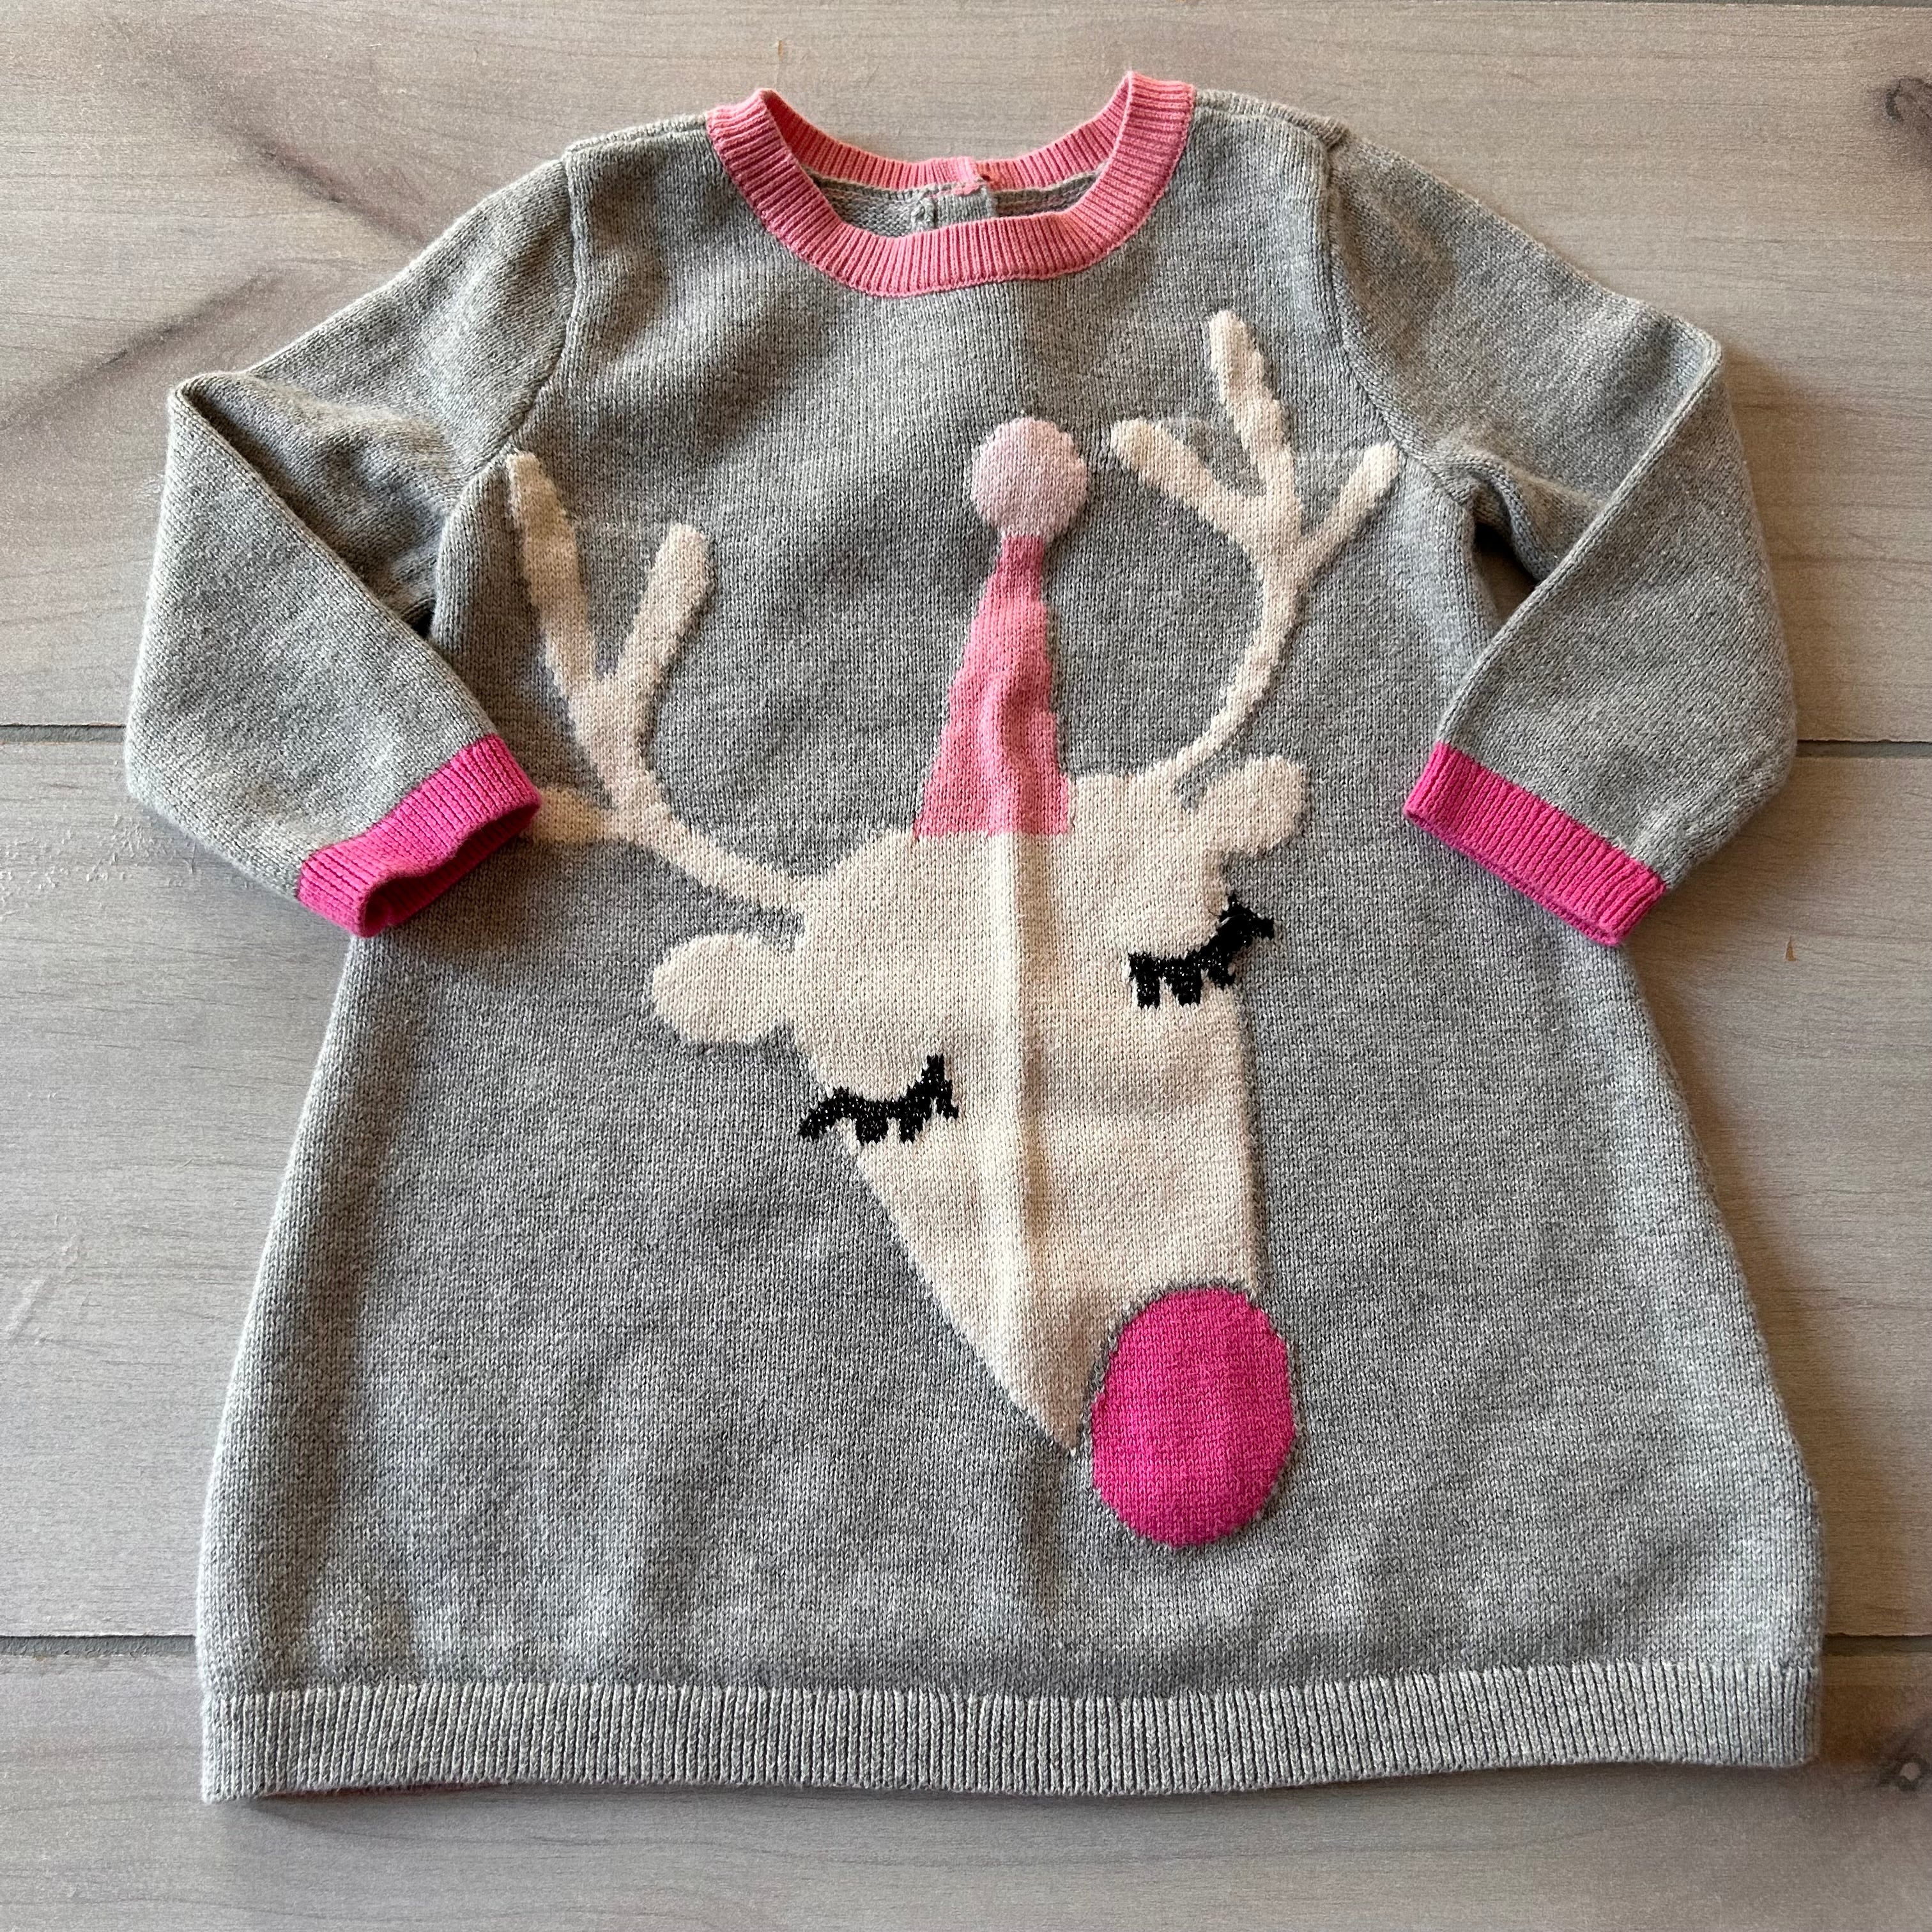 Gymboree Red Sweater with Reindeer 7 – The Sweet Pea Shop